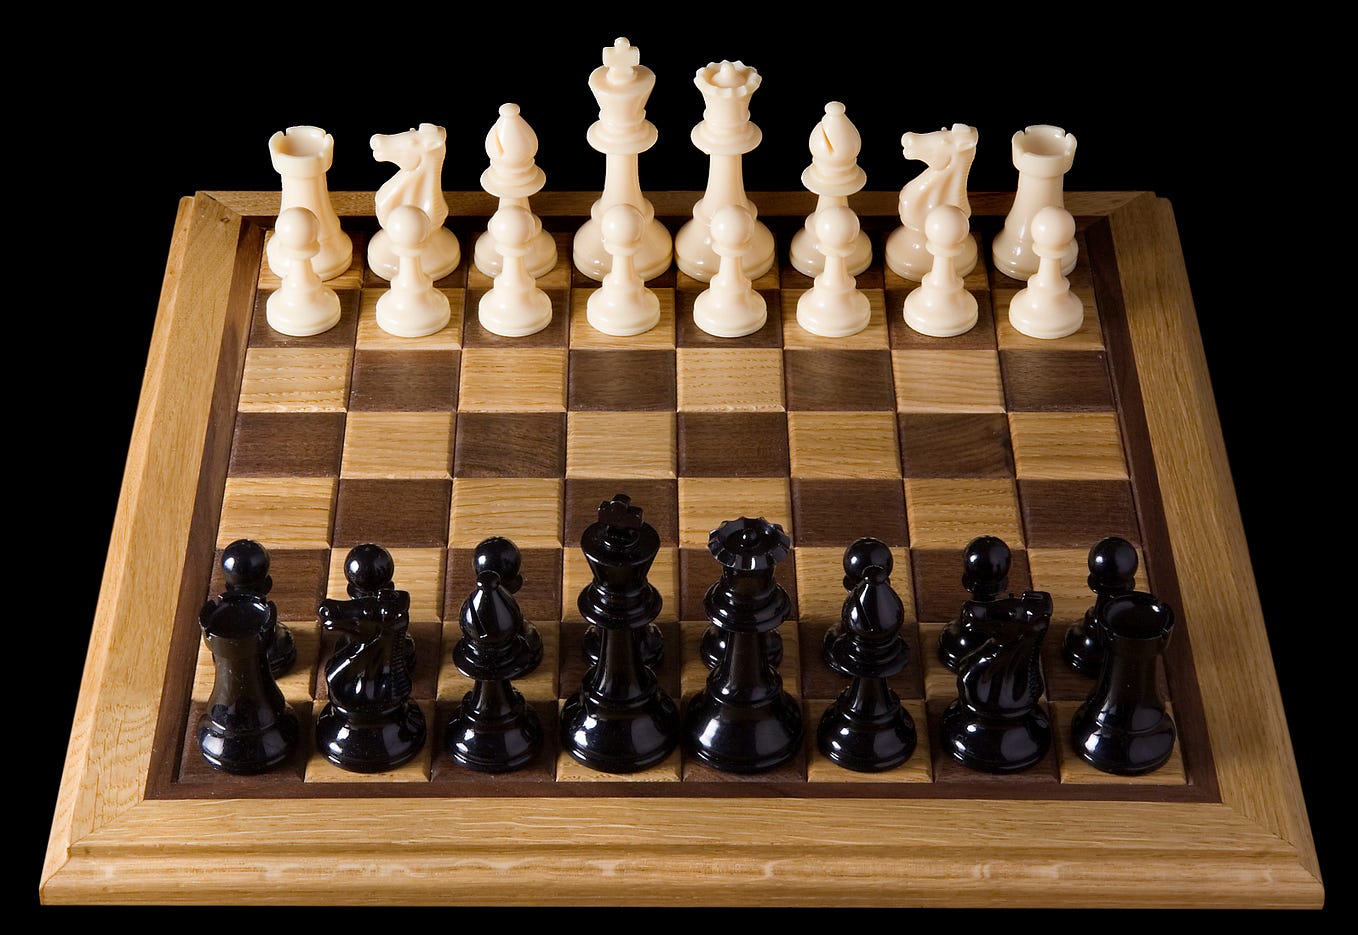 Endgame Essentials: My 3 tips to Master Crucial Chess Endgame Concepts, by  Theodoros Athanasopoulos